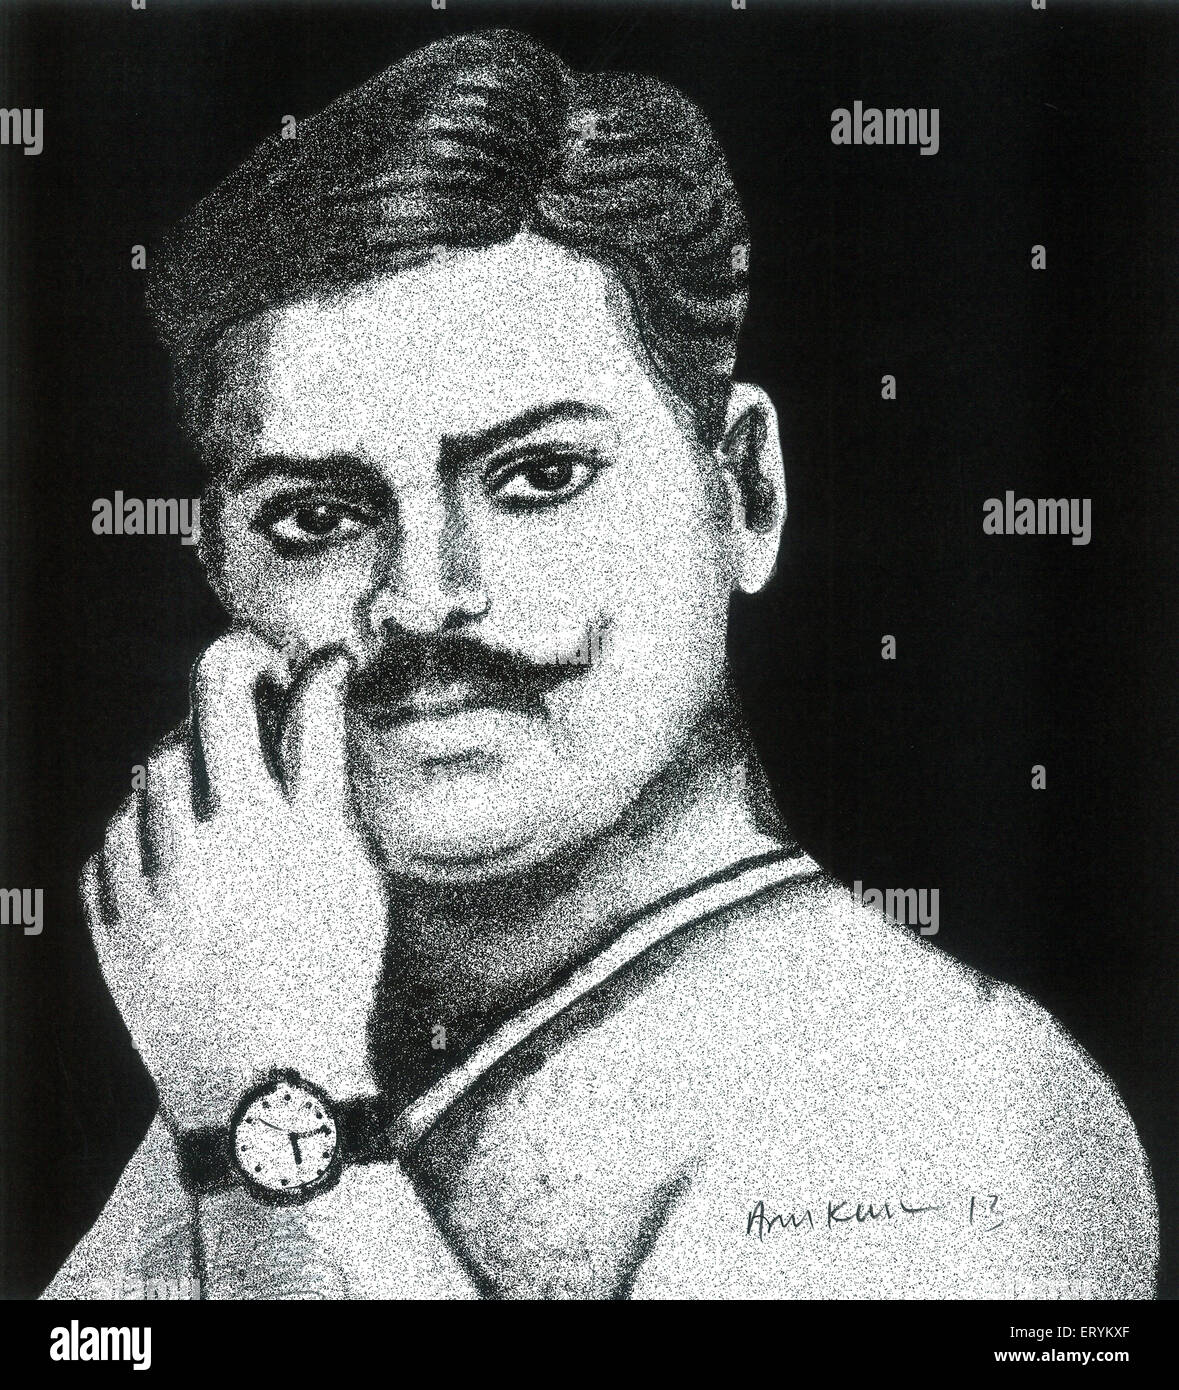 Prime Minister pays tributes to freedom fighter, Chandra Shekhar Azad on  his Jayanti | IBG News Editor Desk